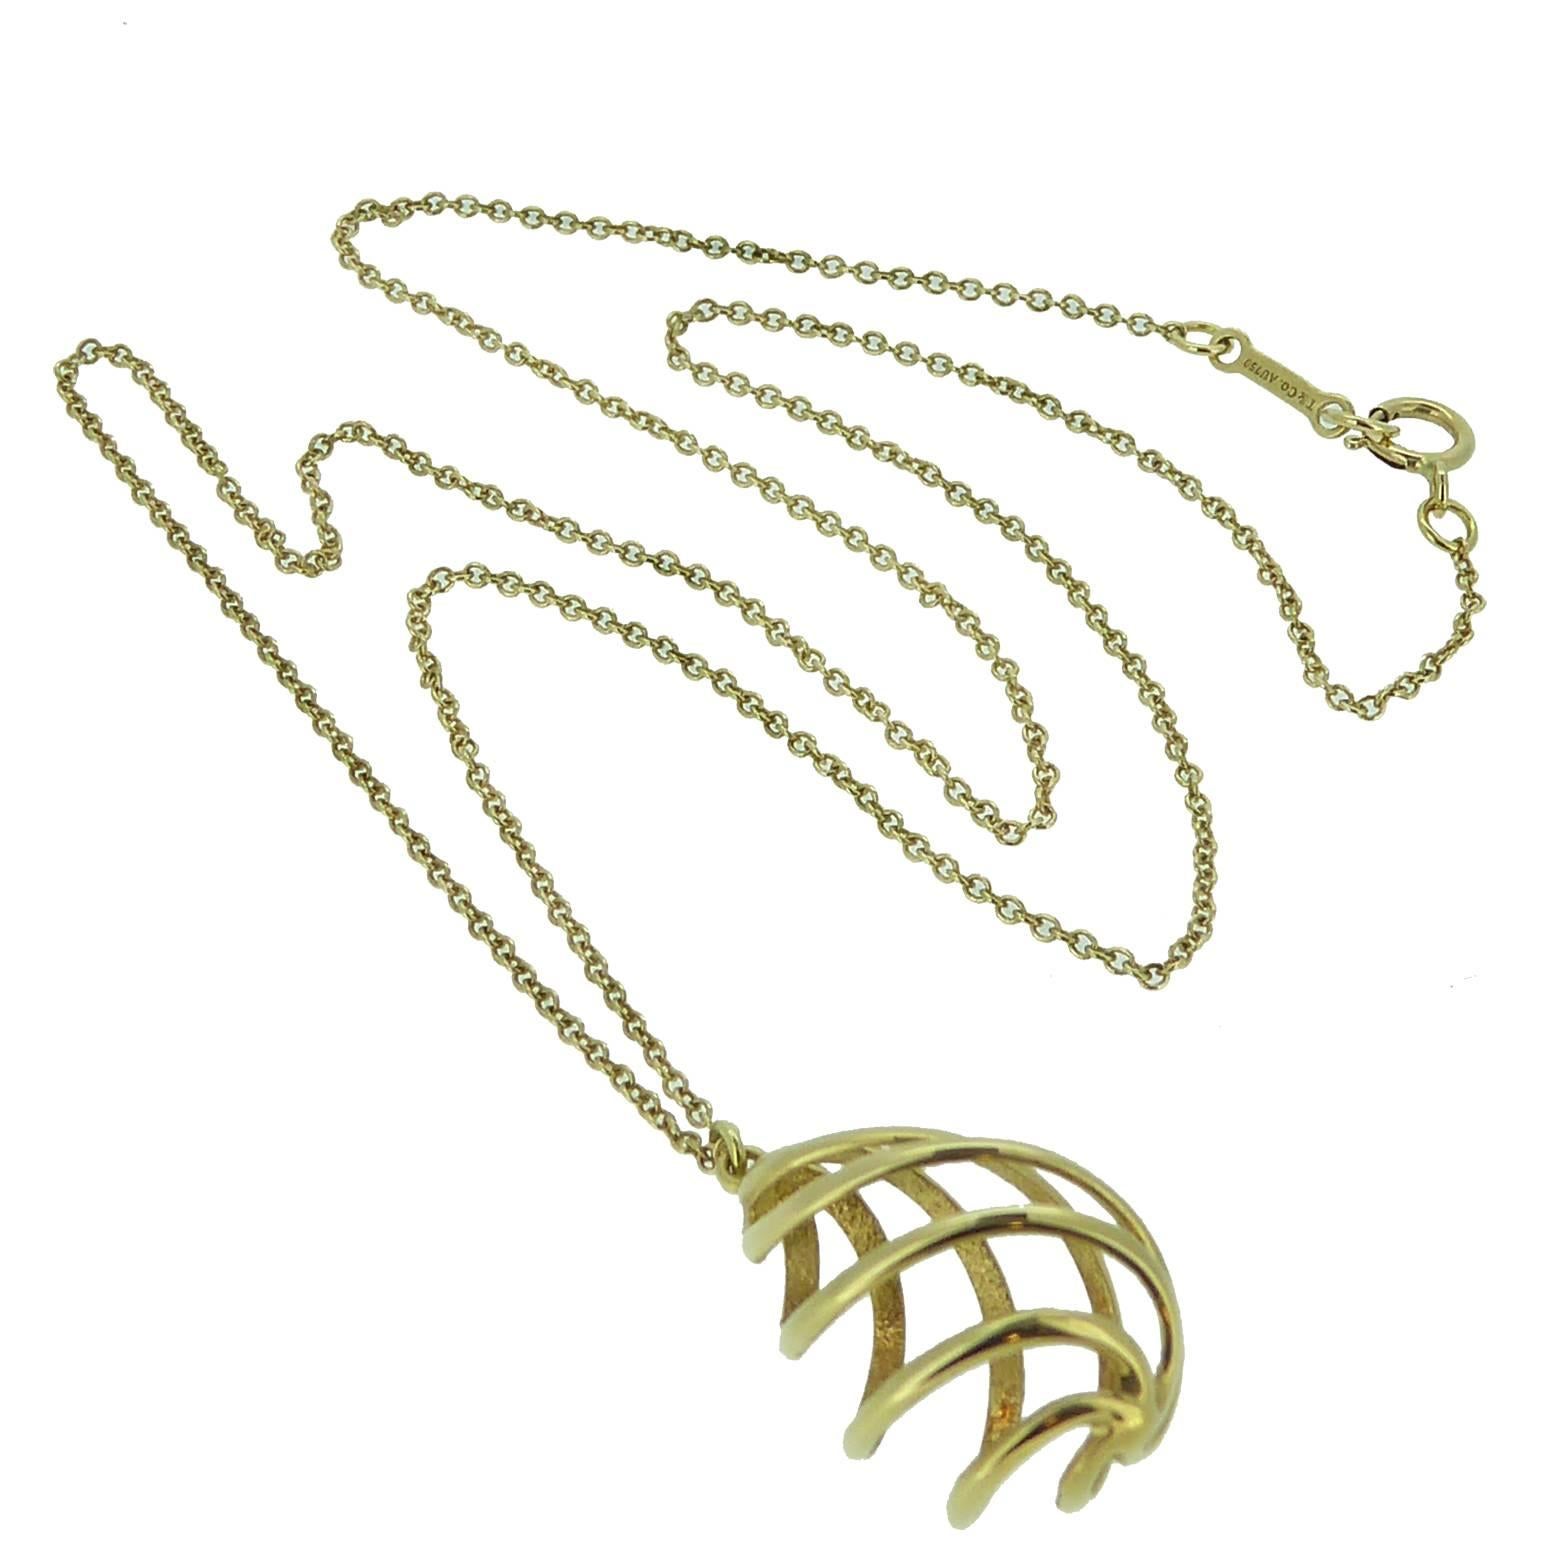 Contemporary Pre-Owned Tiffany & Co. Pendant Designed by Paloma Piccaso in 18 Carat Gold